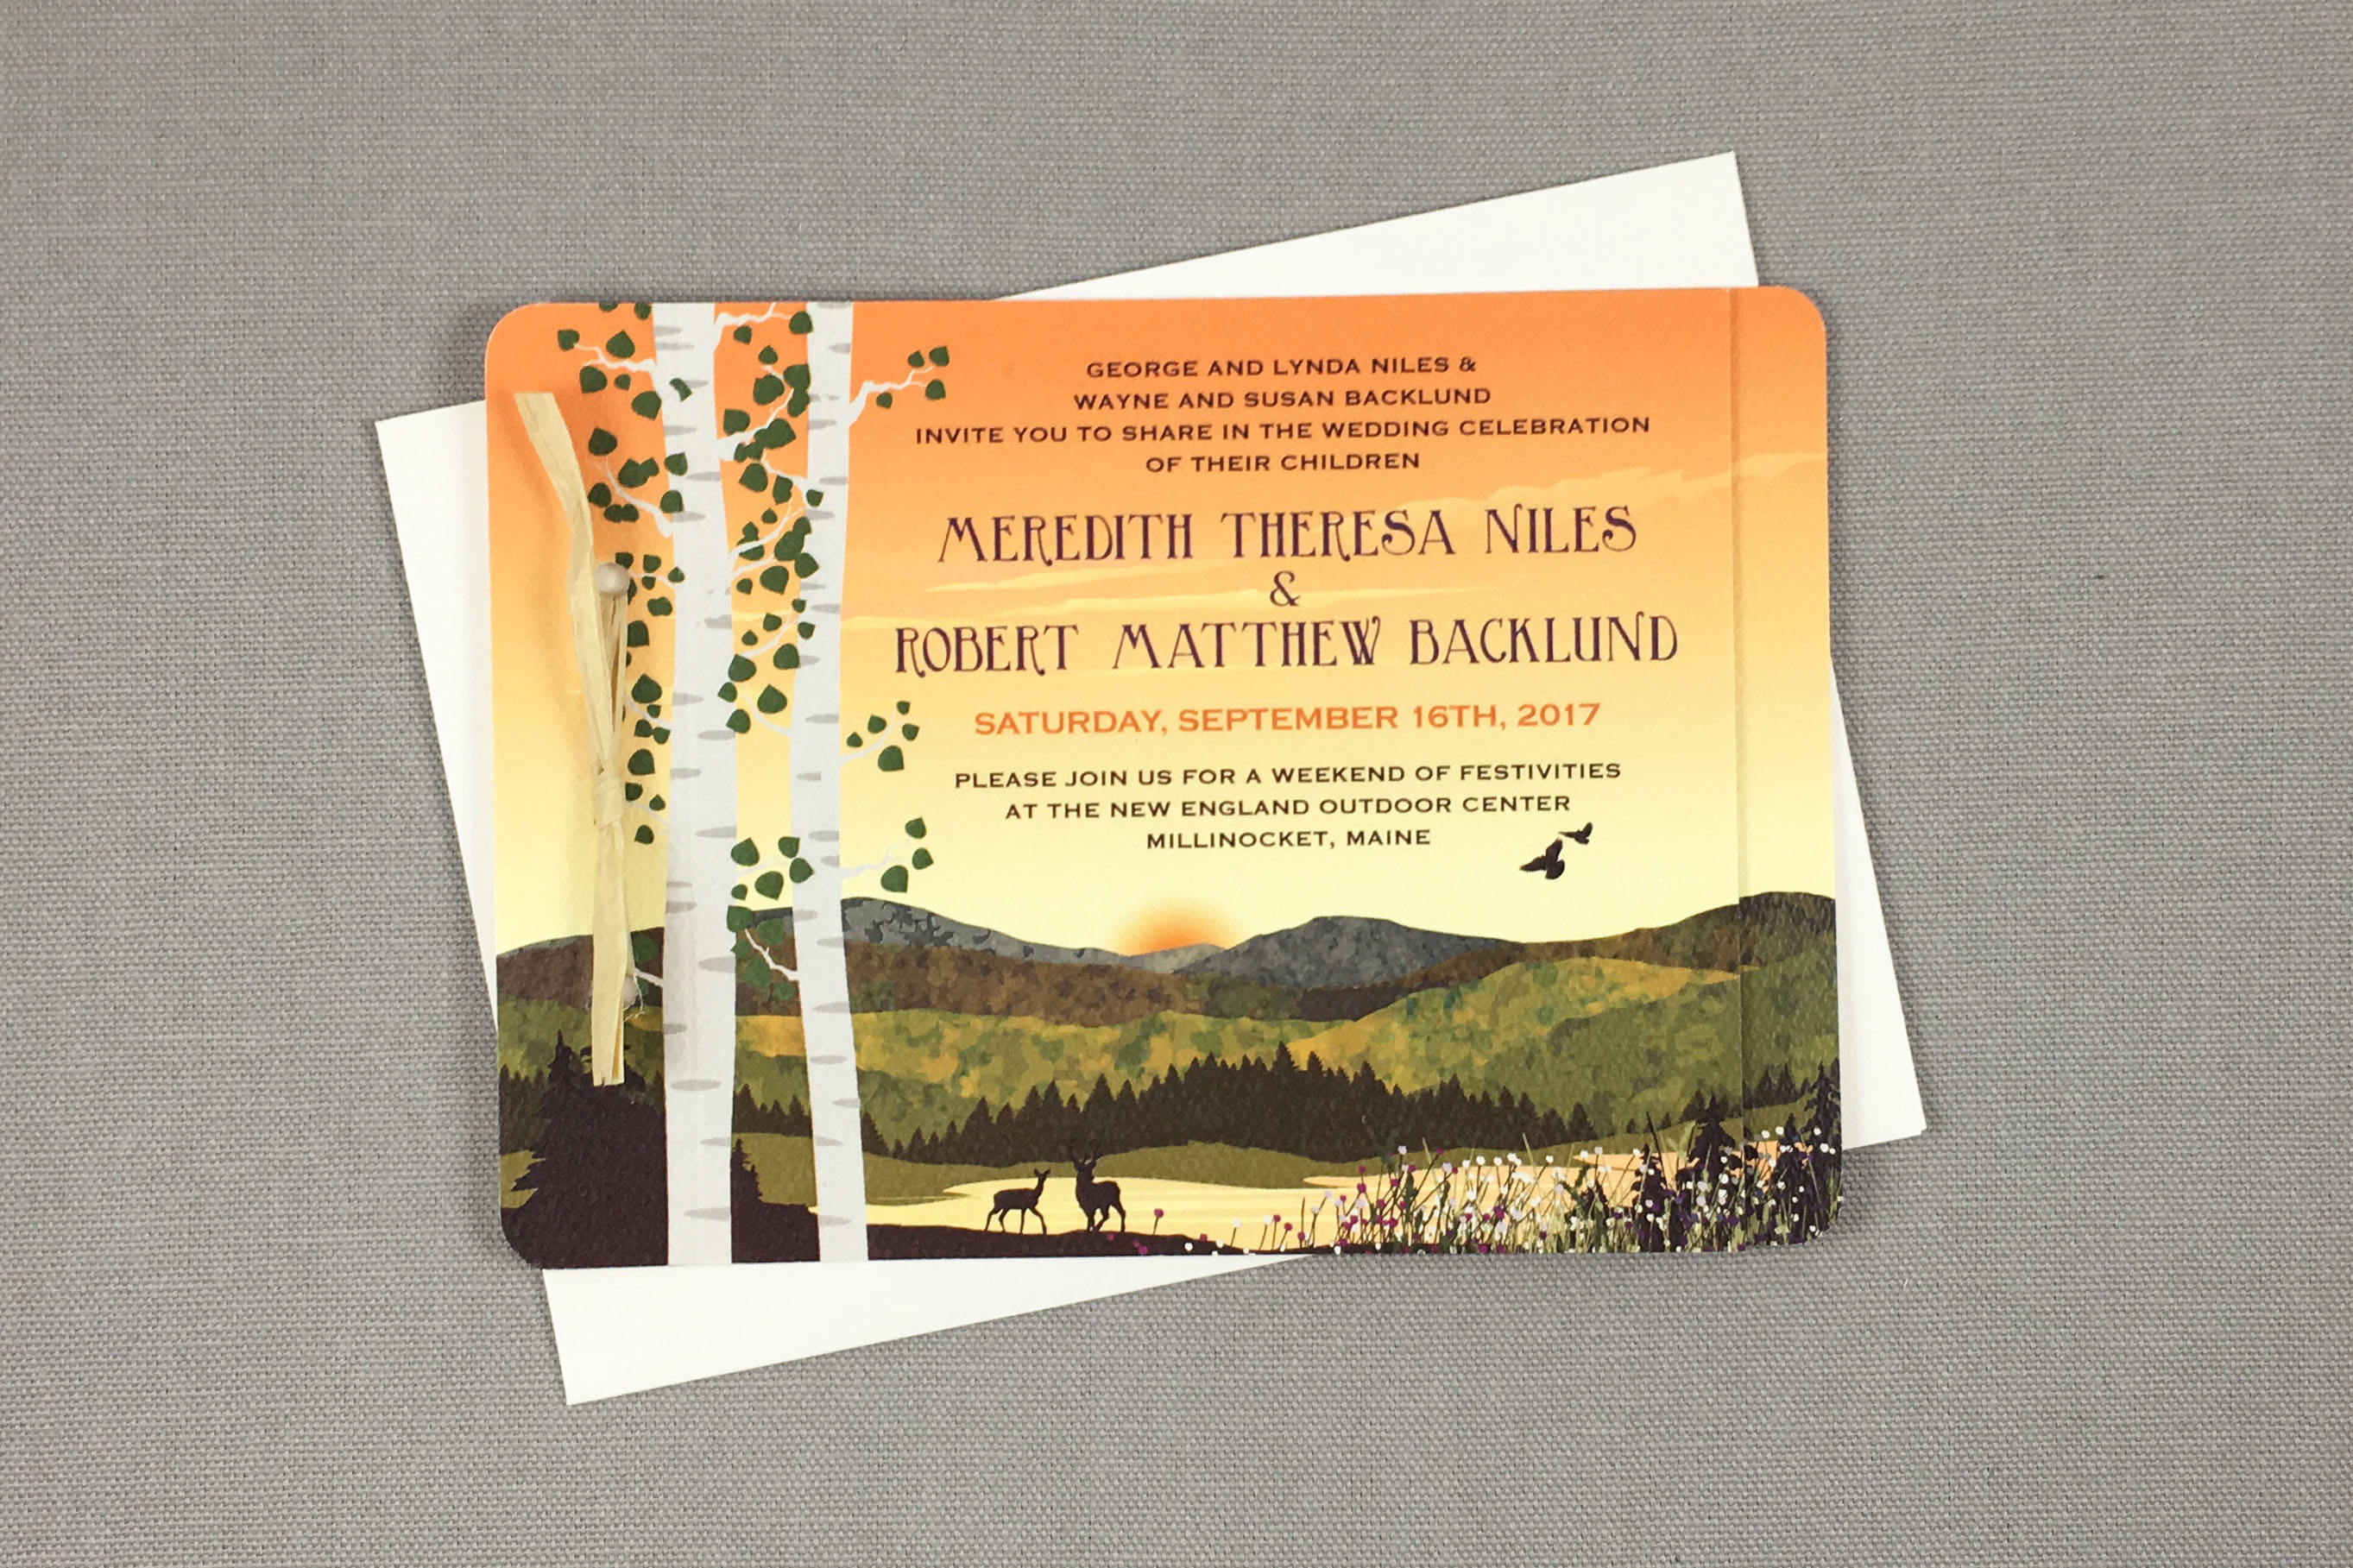 Fall Appalachian Mountains Wedding Invitation - Sunset with Wildflowers 2pg Booklet Wedding Invitation with Tear-off RSVP Postcard